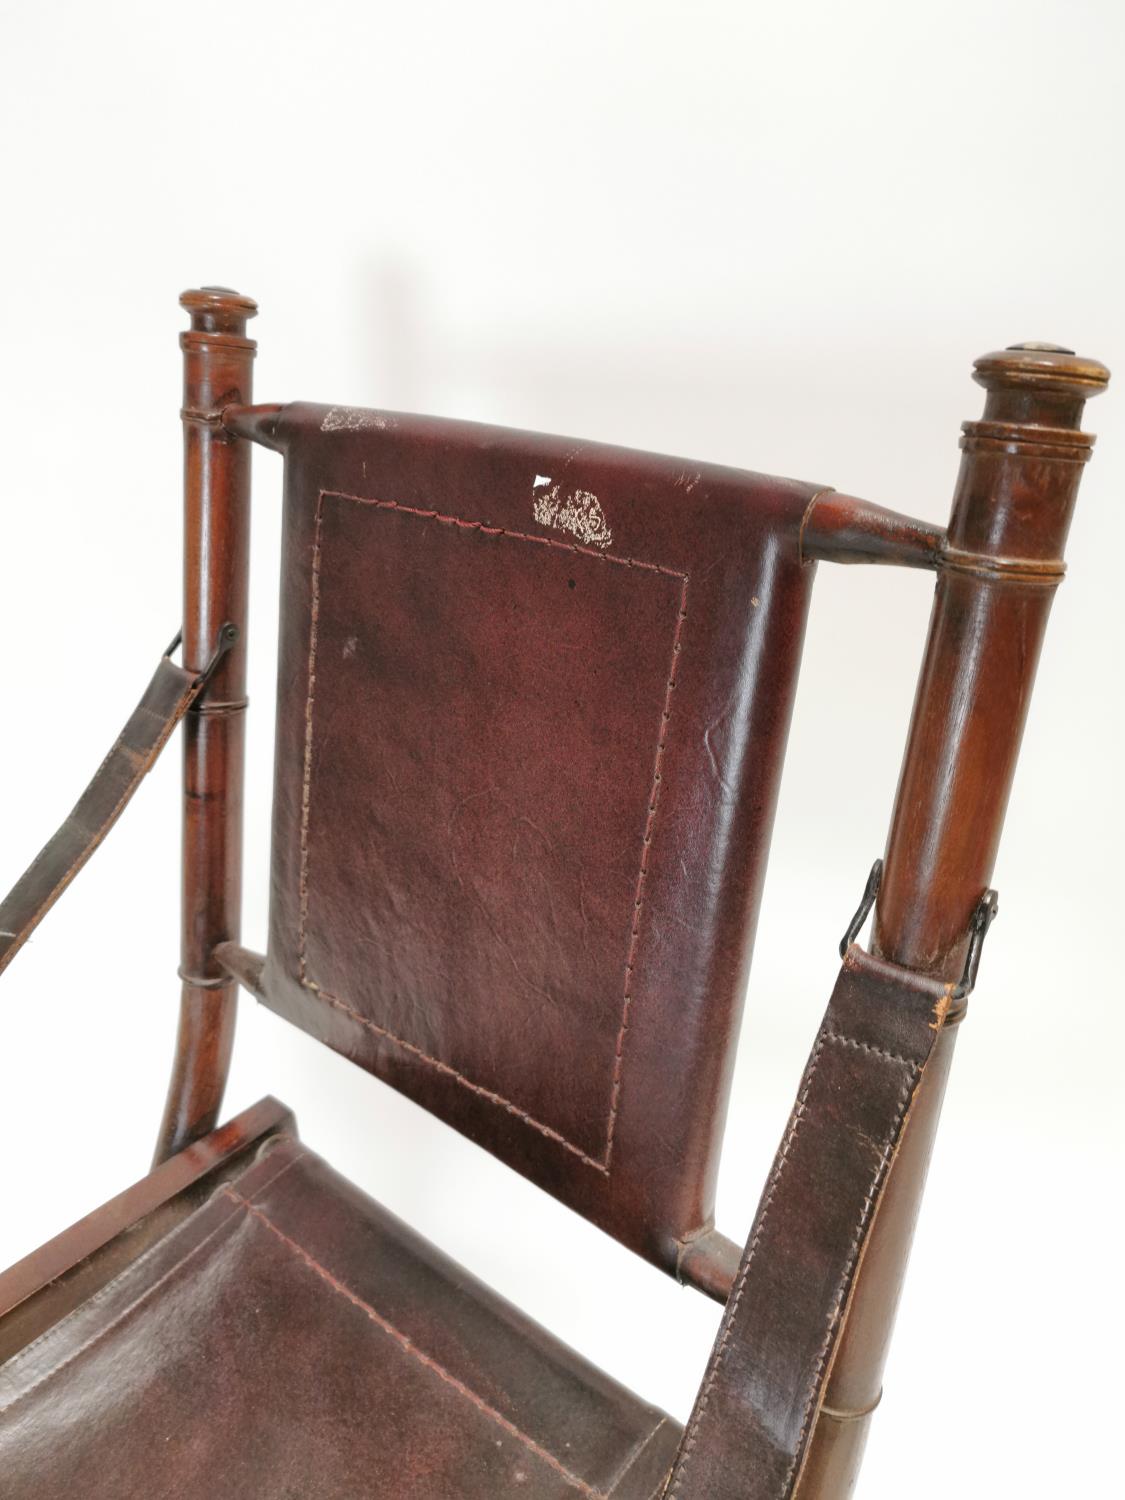 Unsual mahogany and leather folding chair {92 cm H x 50 cm W x 55 cm D}. - Image 2 of 3